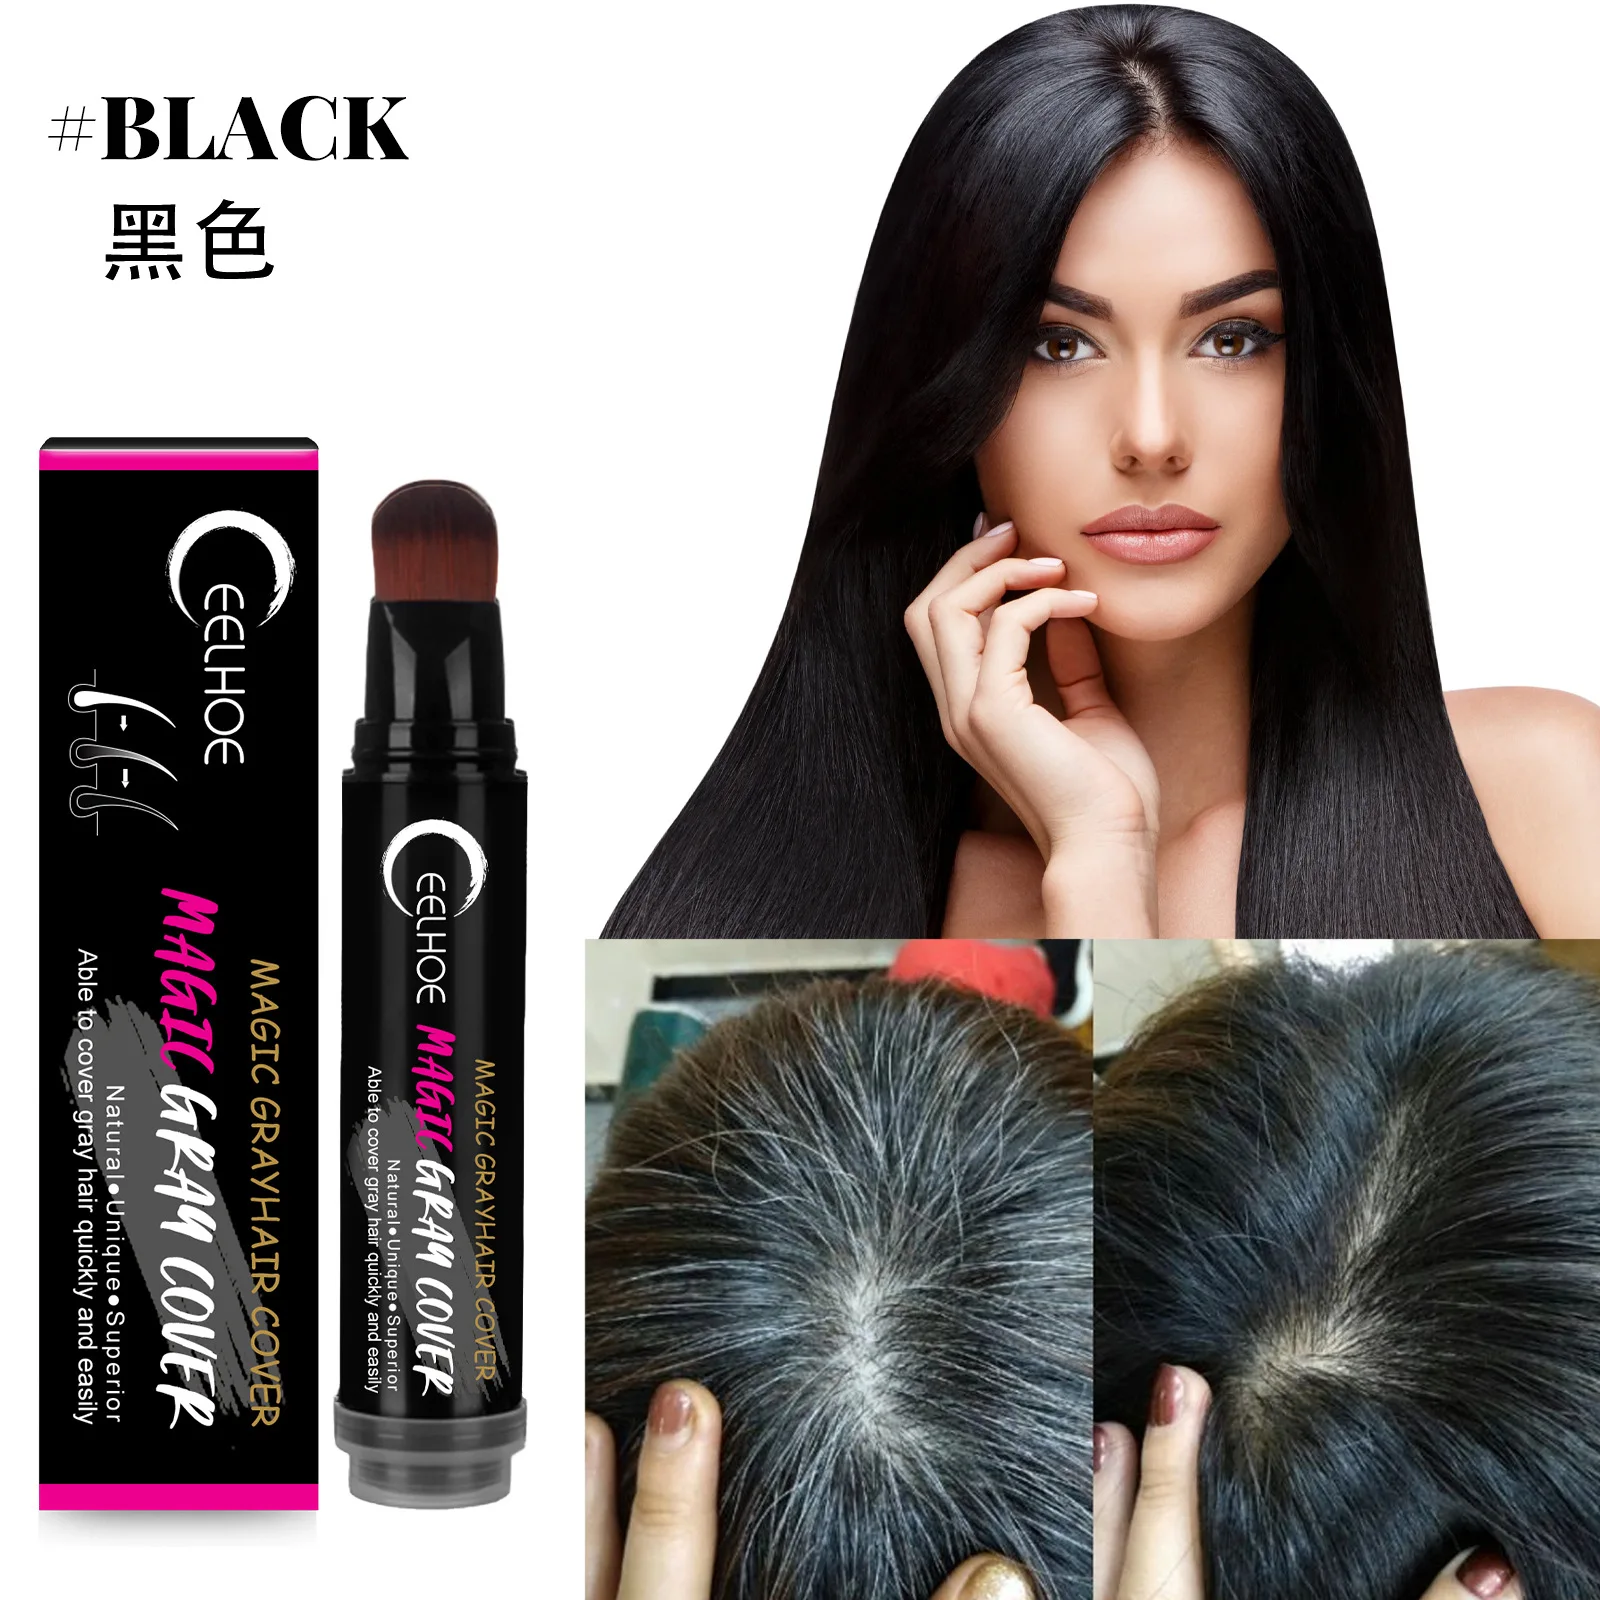 

EELHOE Disposable Botanical Hair Dye Sticks Black Brown Washable Non-Harmful Gray Hair Covering Sticks Hair Color Replacement